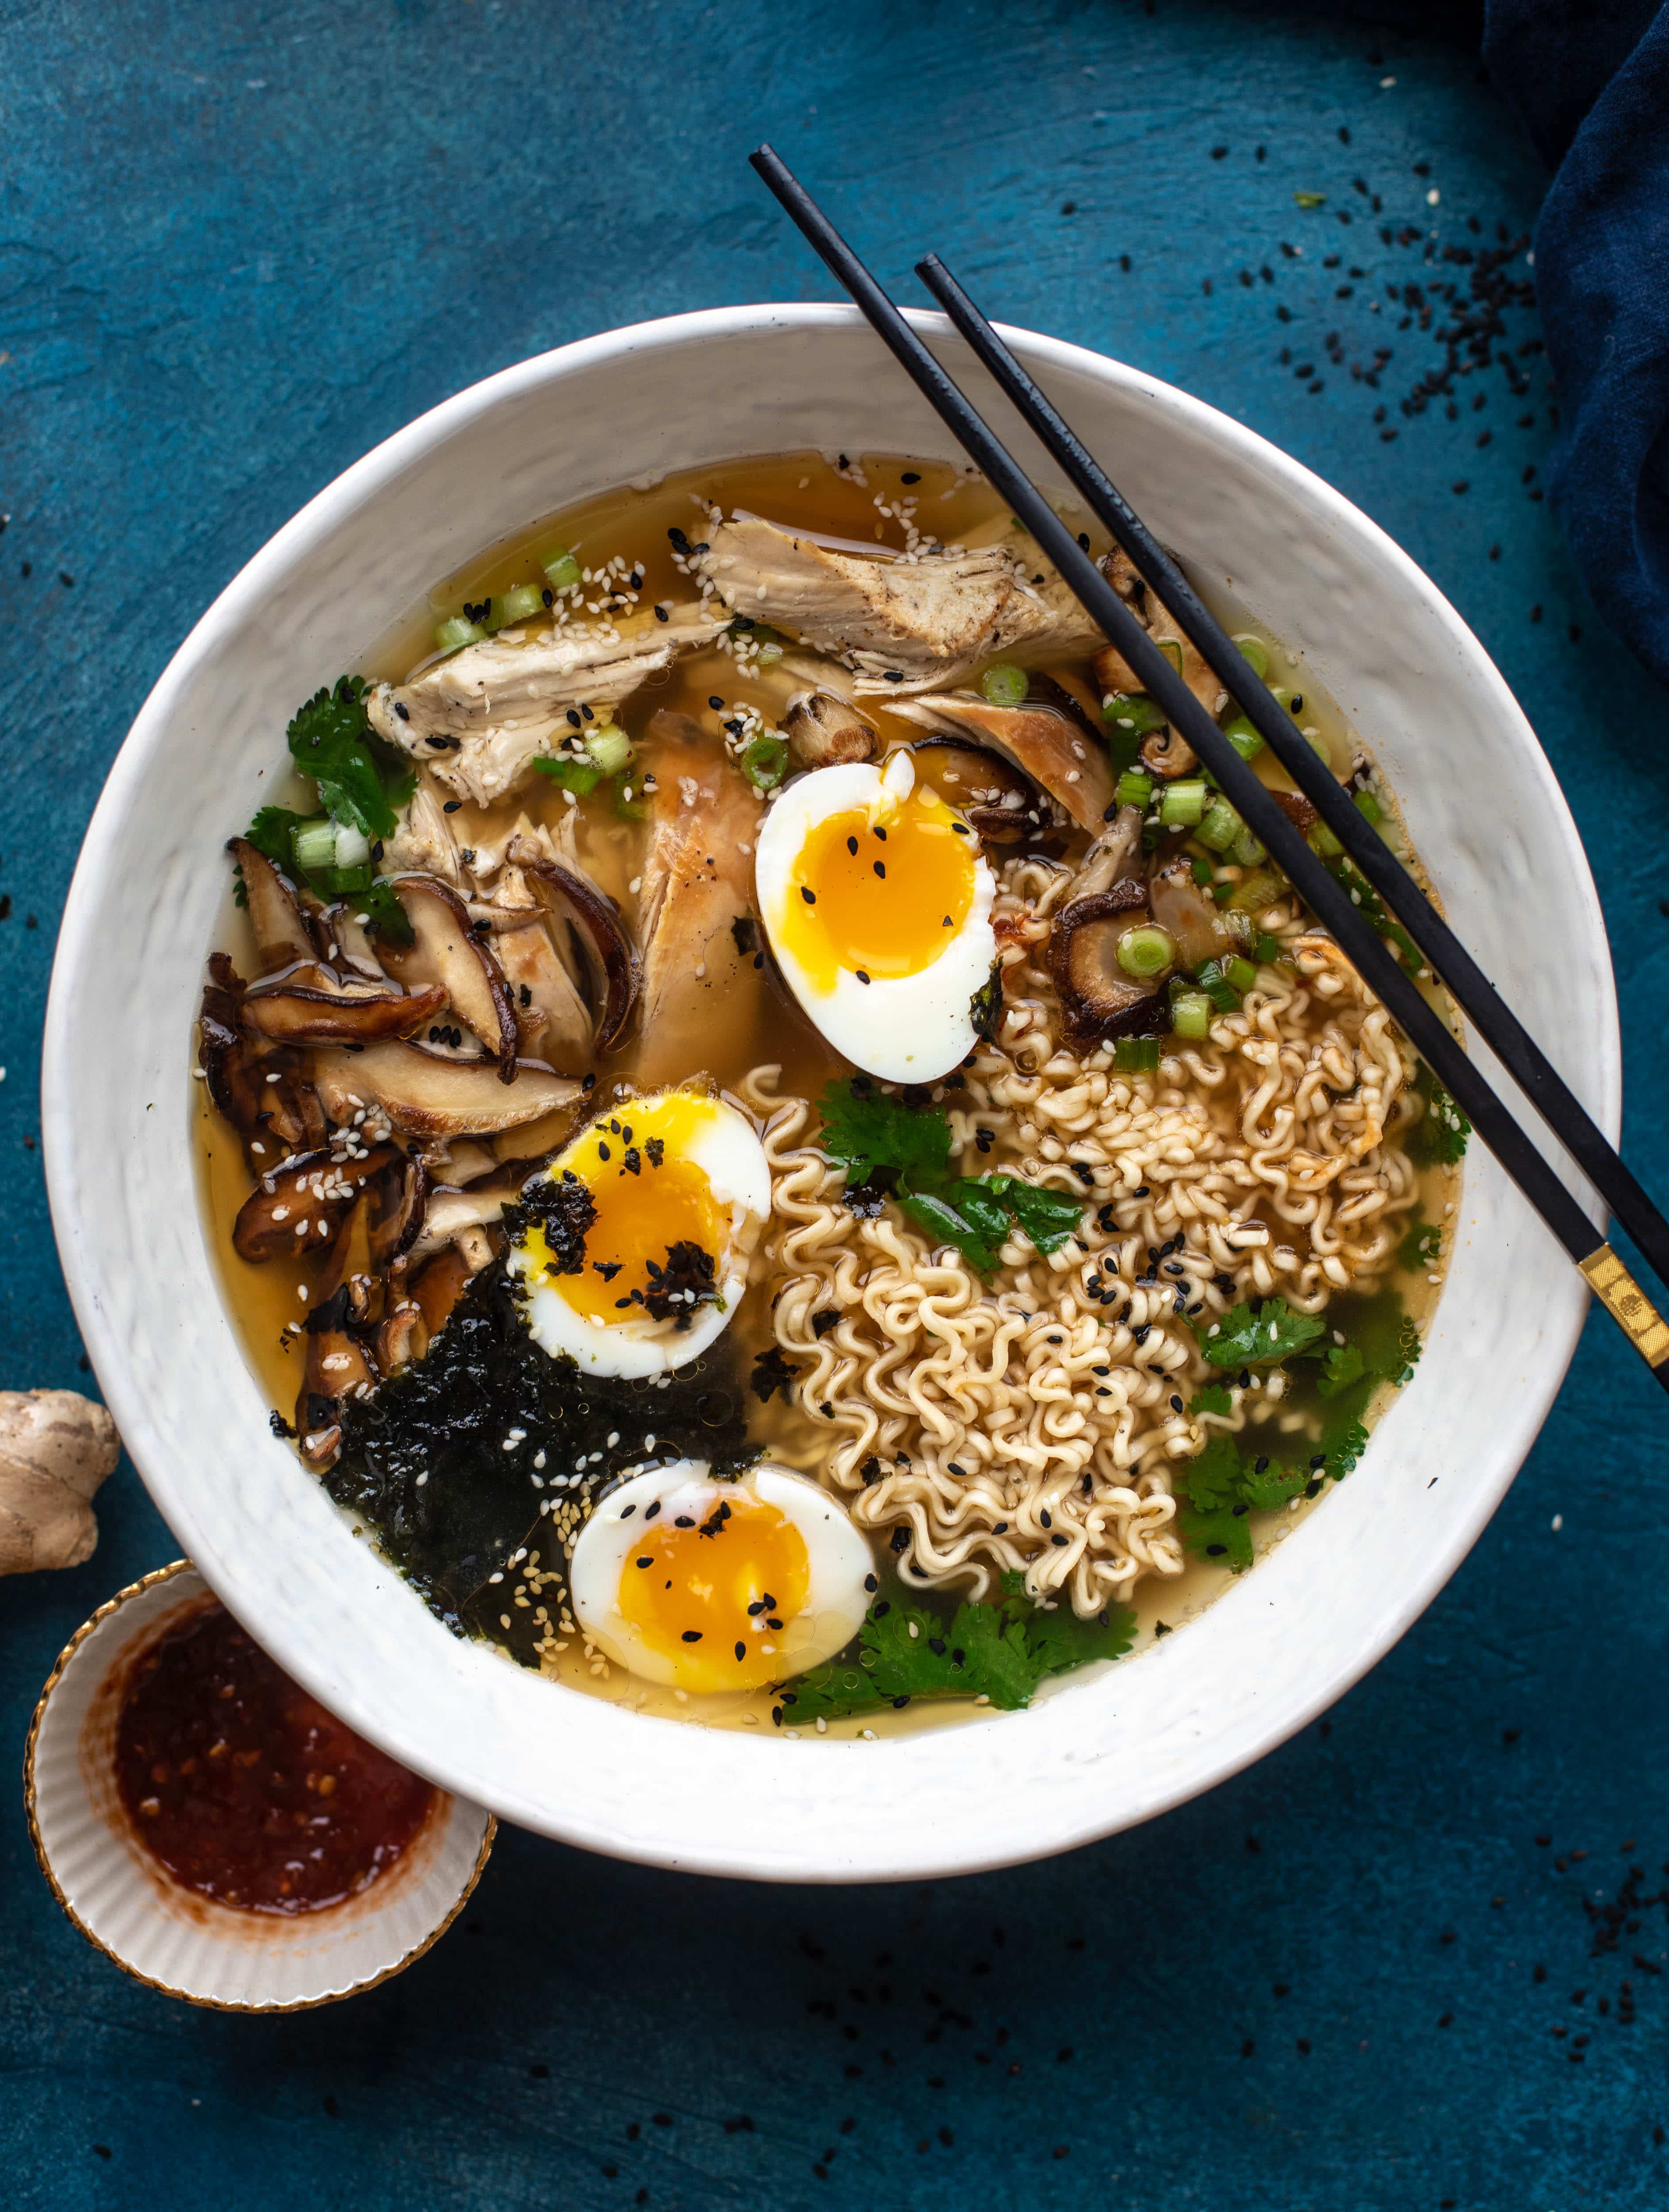 This roasted turkey ramen recipe is made with delish leftover Thanksgiving turkey, ramen noodles, a savory broth and soft boiled eggs!